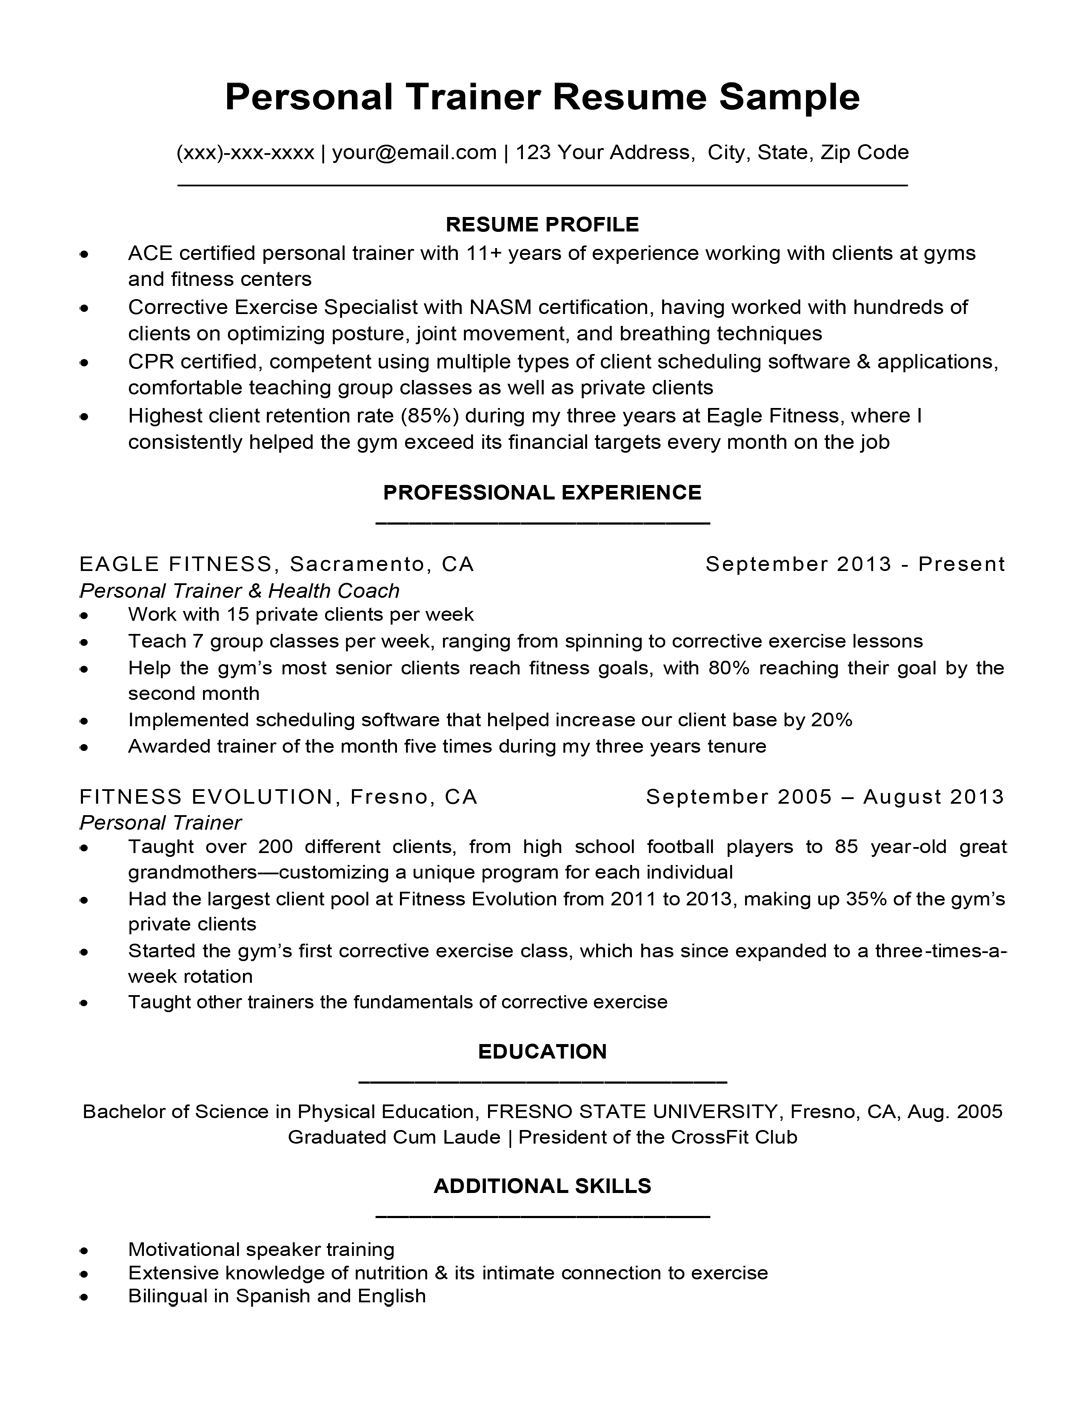 Personal Trainer Cv Template from resumecompanion.com